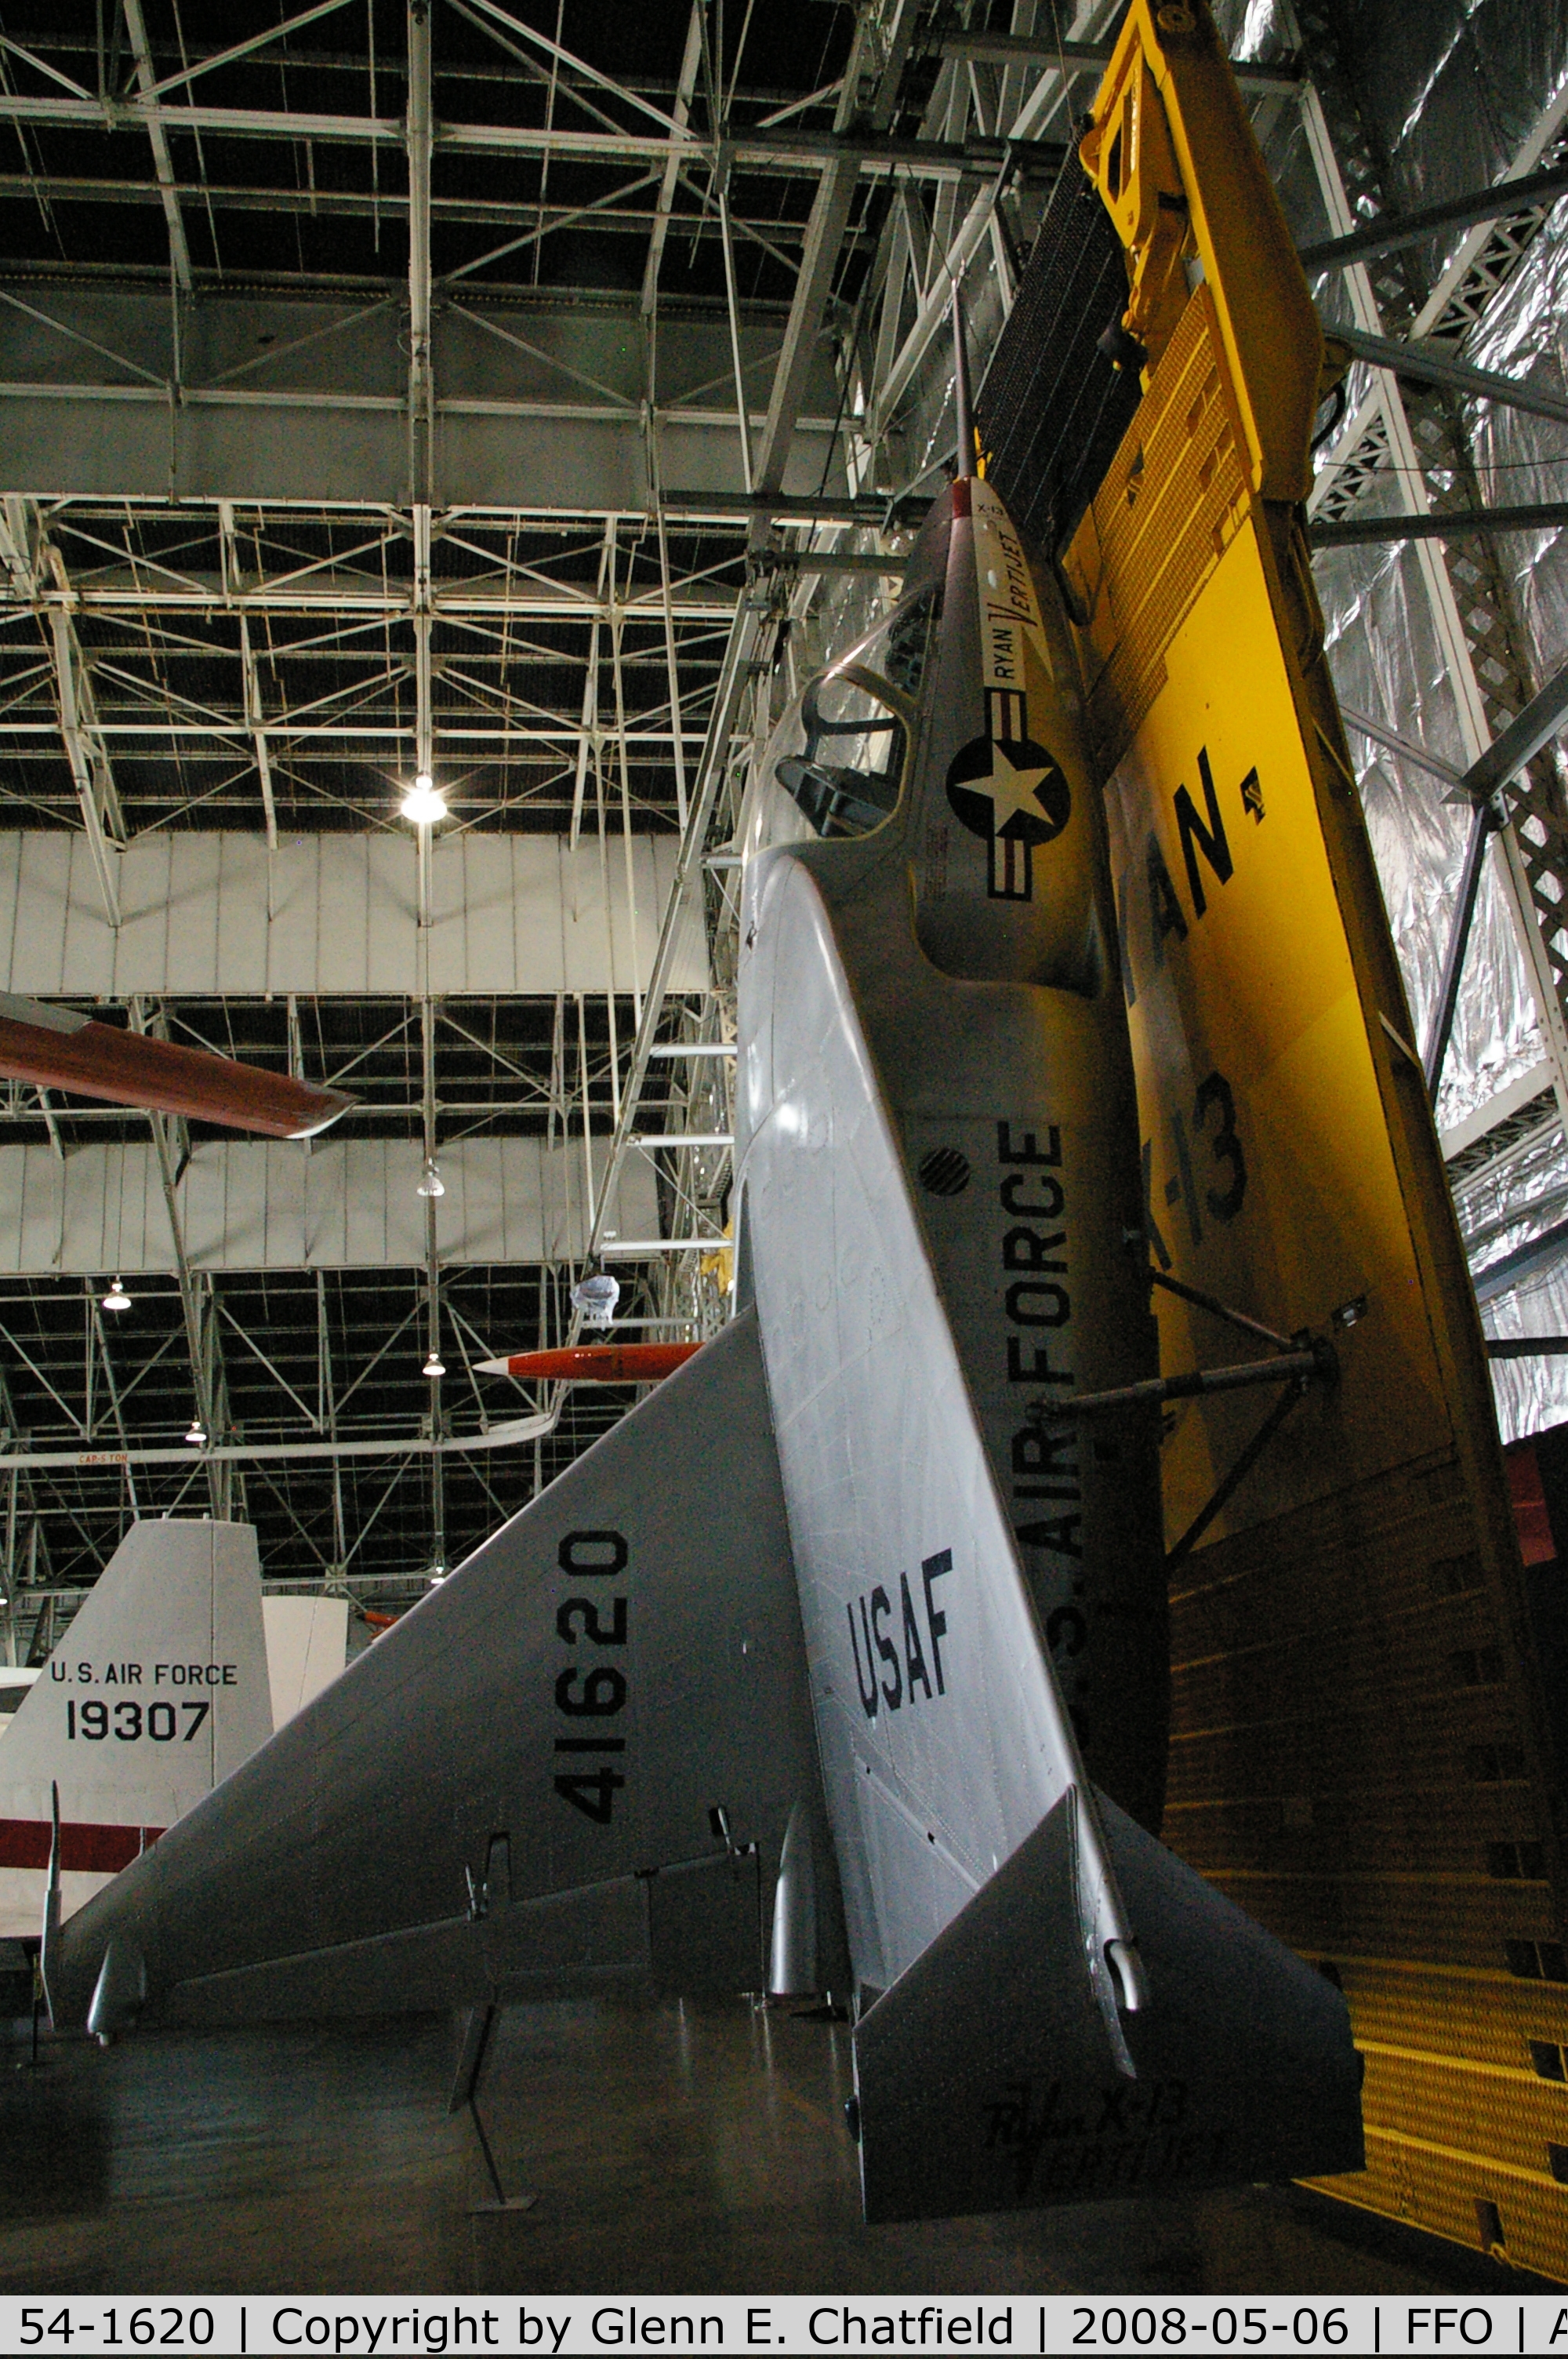 54-1620, 1954 Ryan X-13-RY Vertijet C/N Not found 54-1620, Displayed at the National Museum of the U.S. Air Force